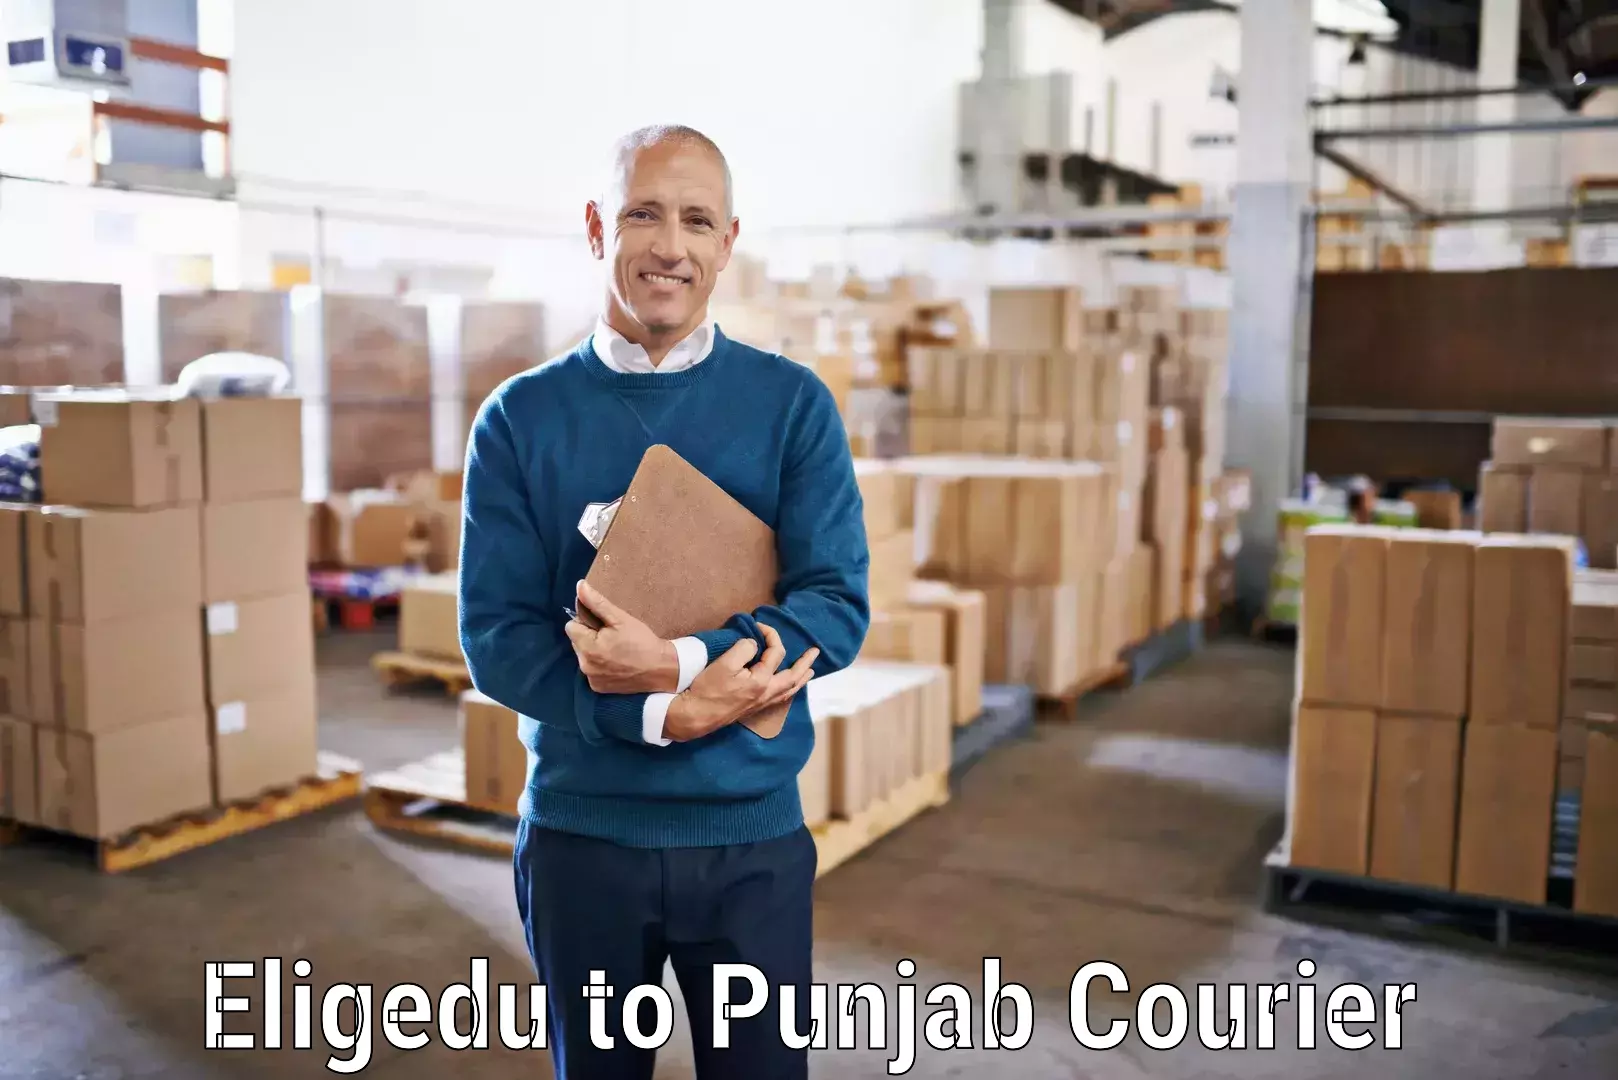 Personal parcel delivery in Eligedu to Central University of Punjab Bathinda